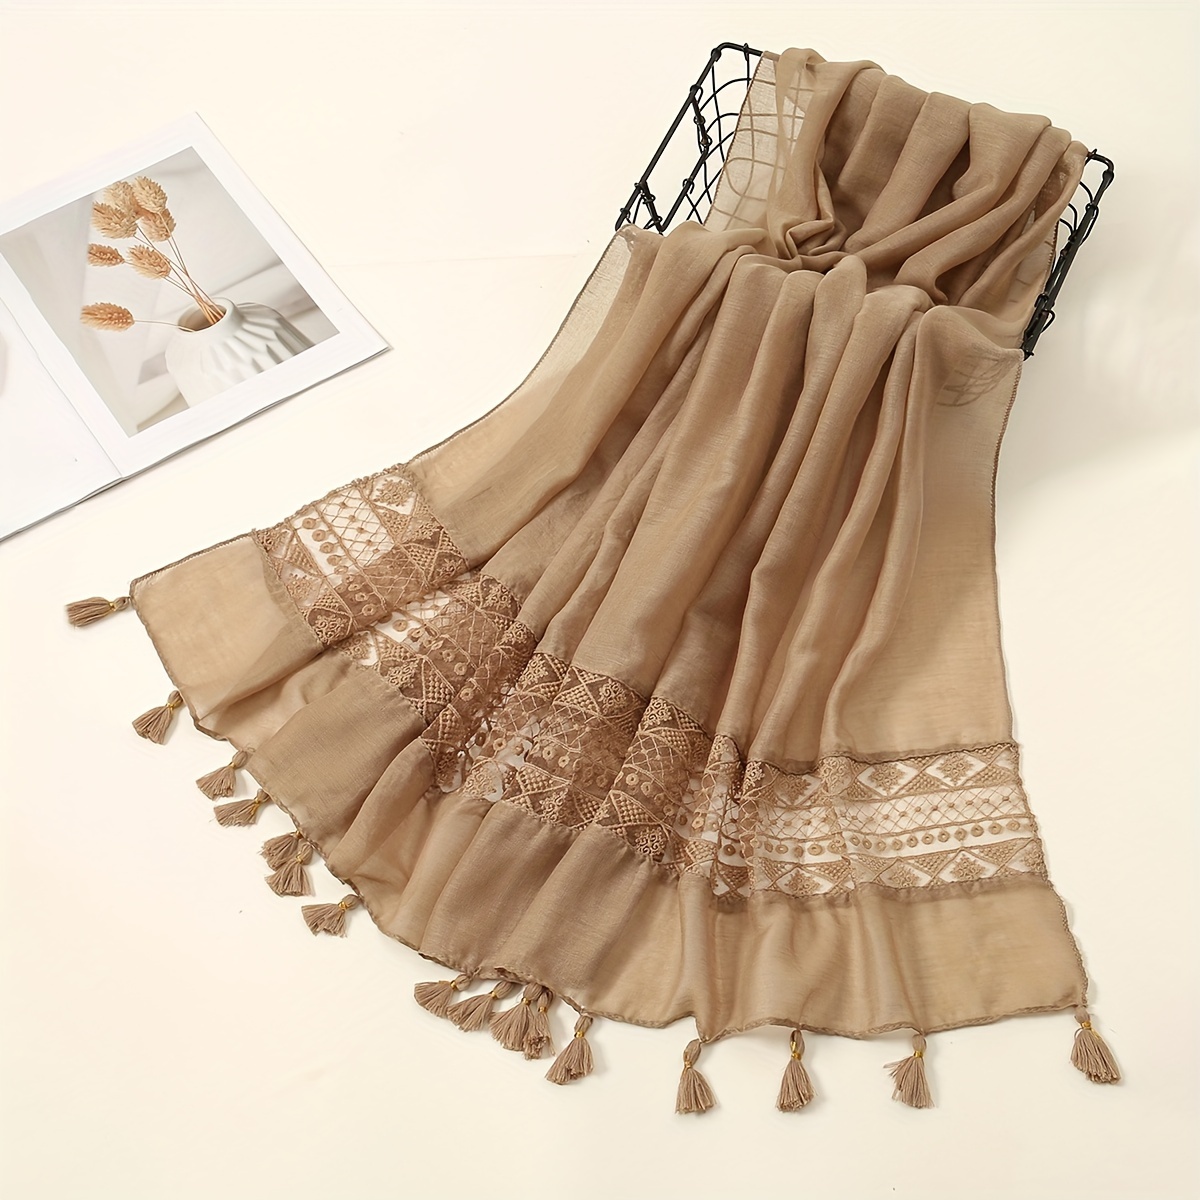 

Embroidery Hollow Lace Tassel Scarf Fashion Elegant Casual Cold Weather Scarves Wraps For Women For Eid